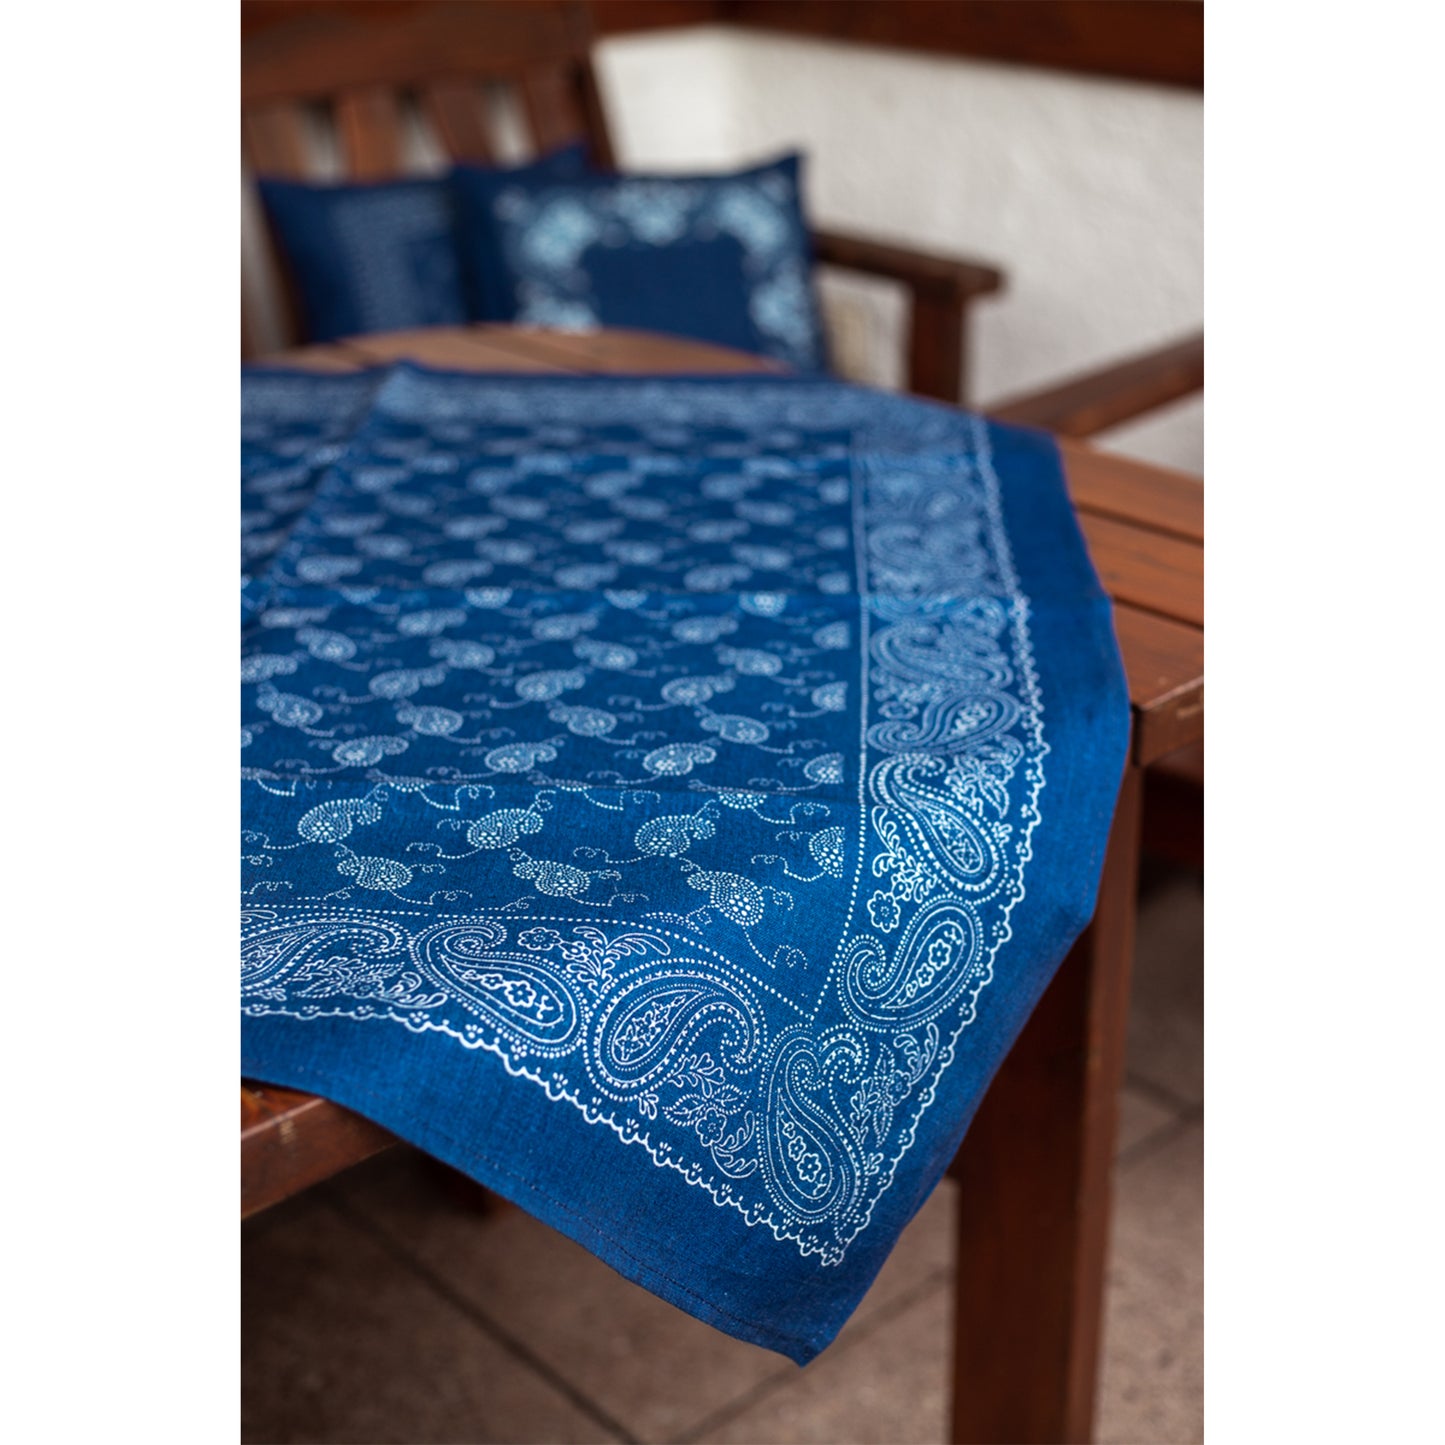 Austria, Karl and Maria Wagner, Blaudruck Basely Print Tablecloth Square